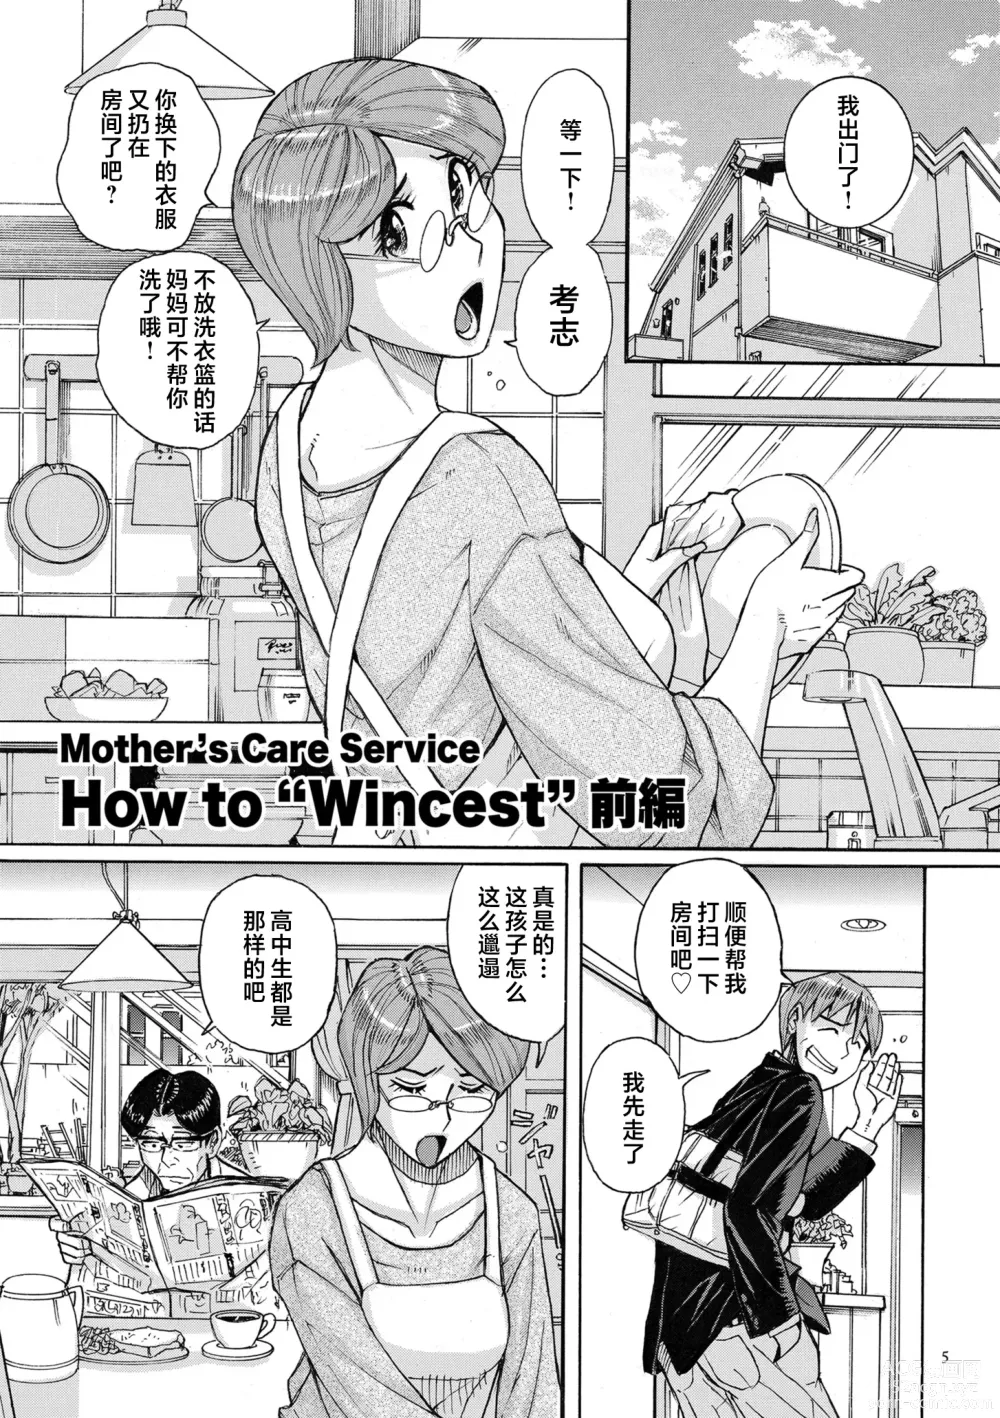 Page 5 of manga Mother’s Care Service How to ’Wincest’